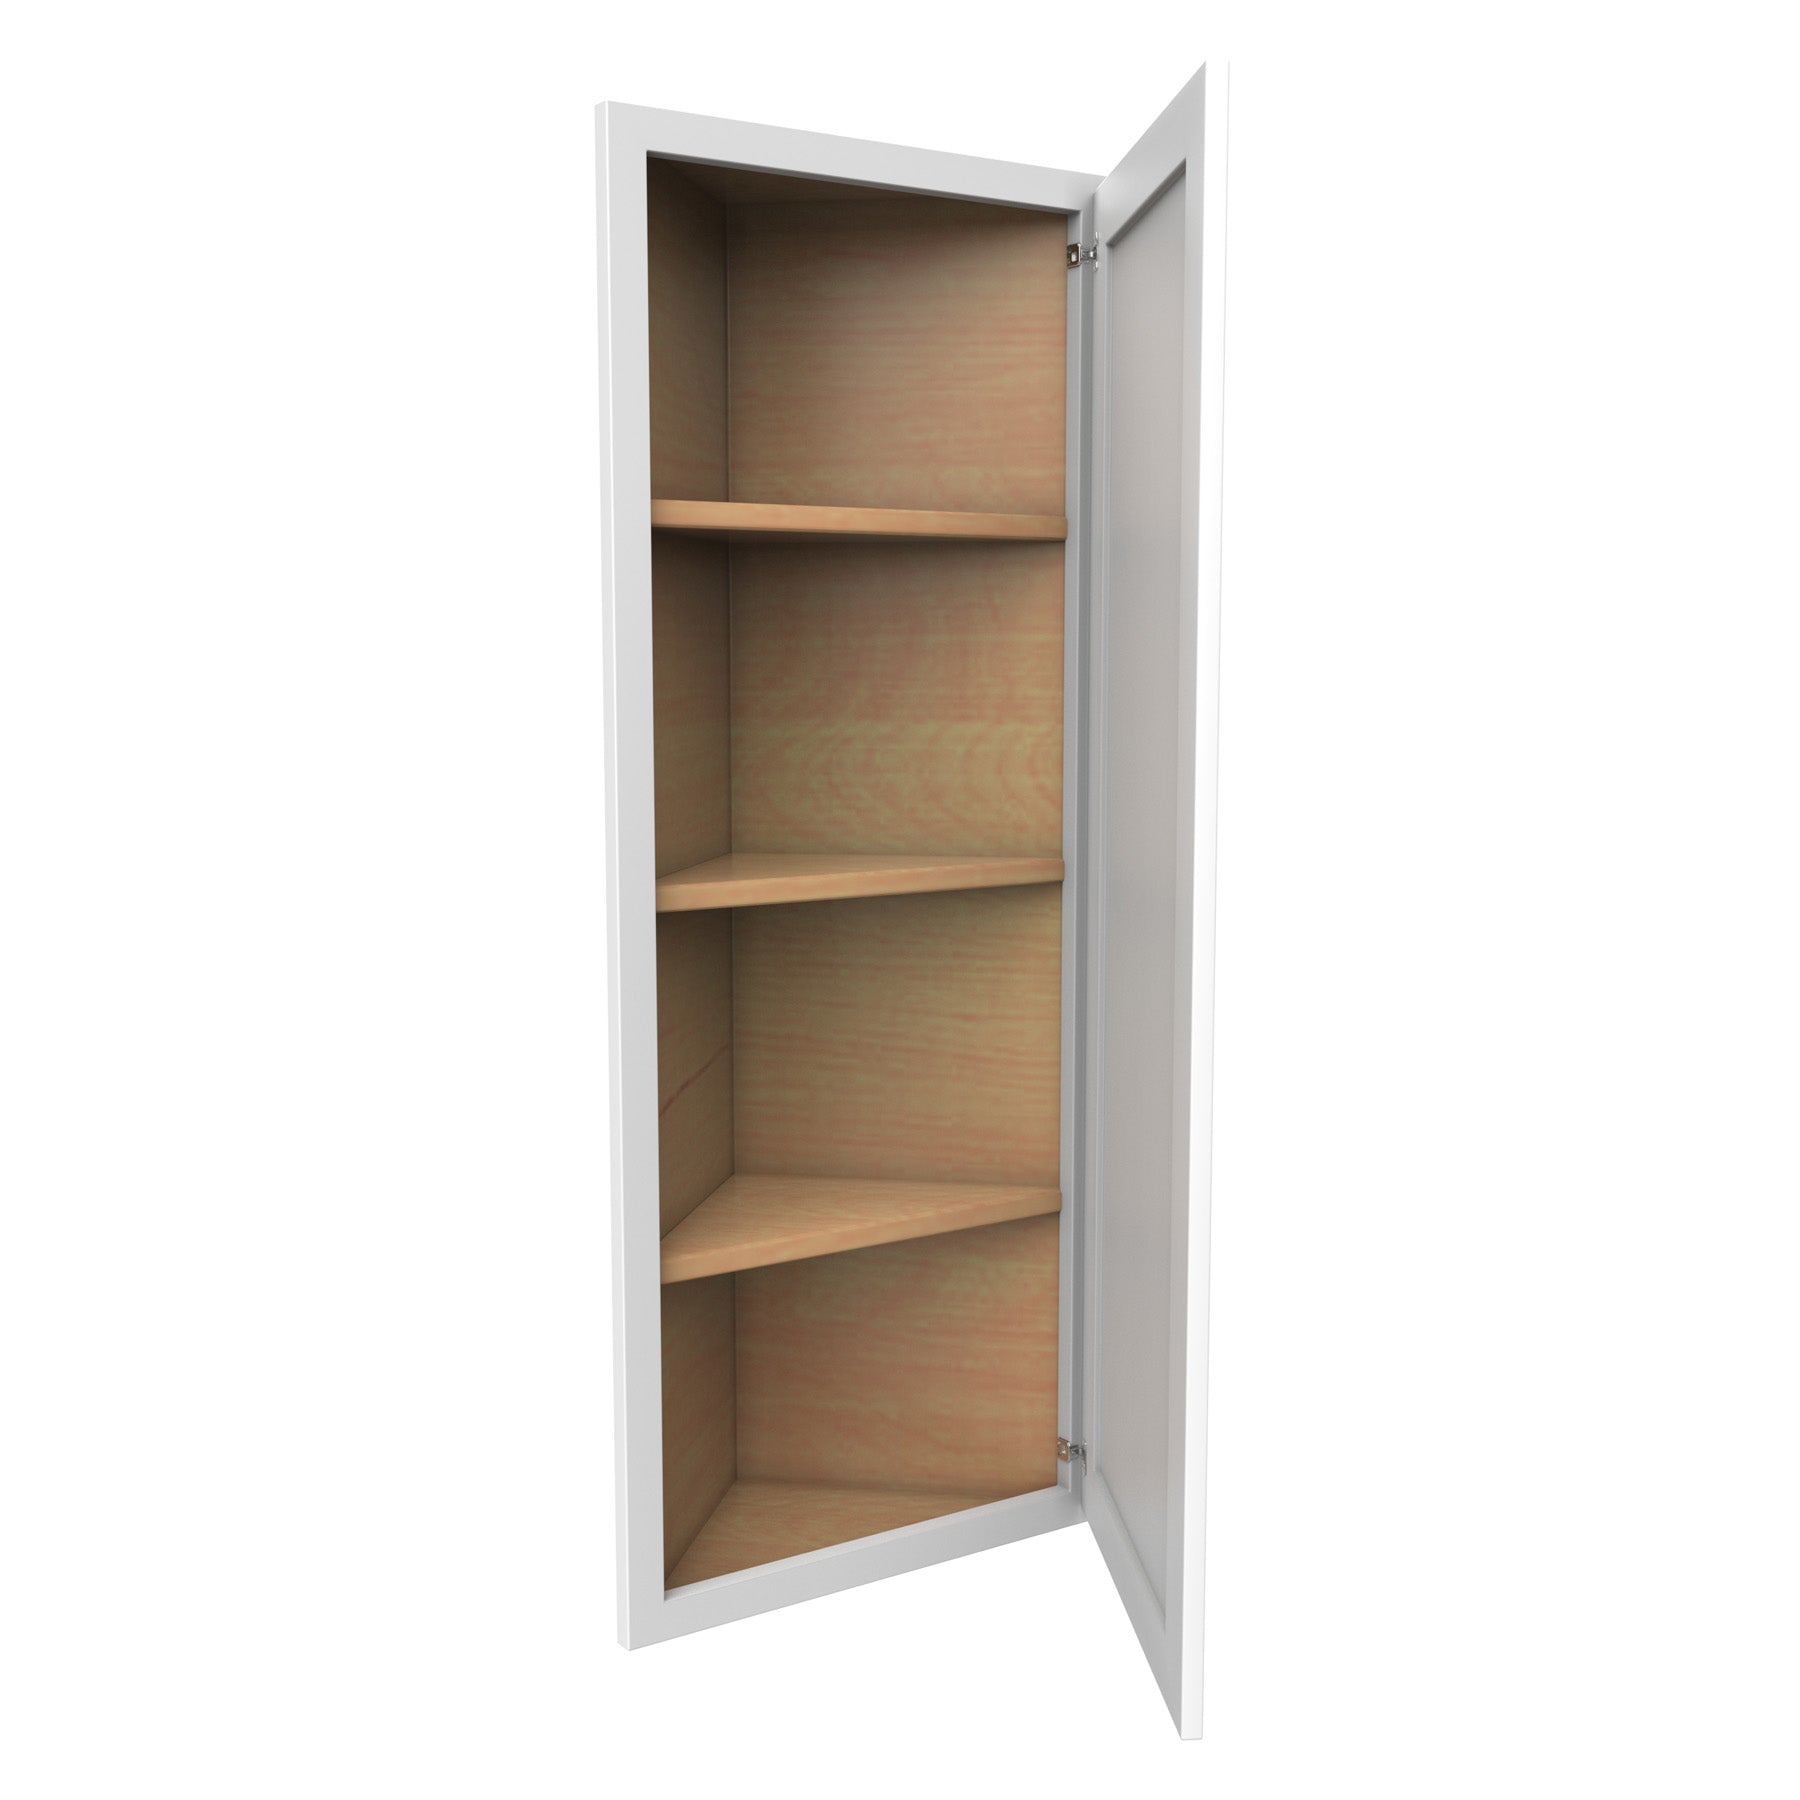 42 Inch High Wall End Shelf Cabinet - Luxor White Shaker - Ready To Assemble, 12"W x 42"H x 12"D